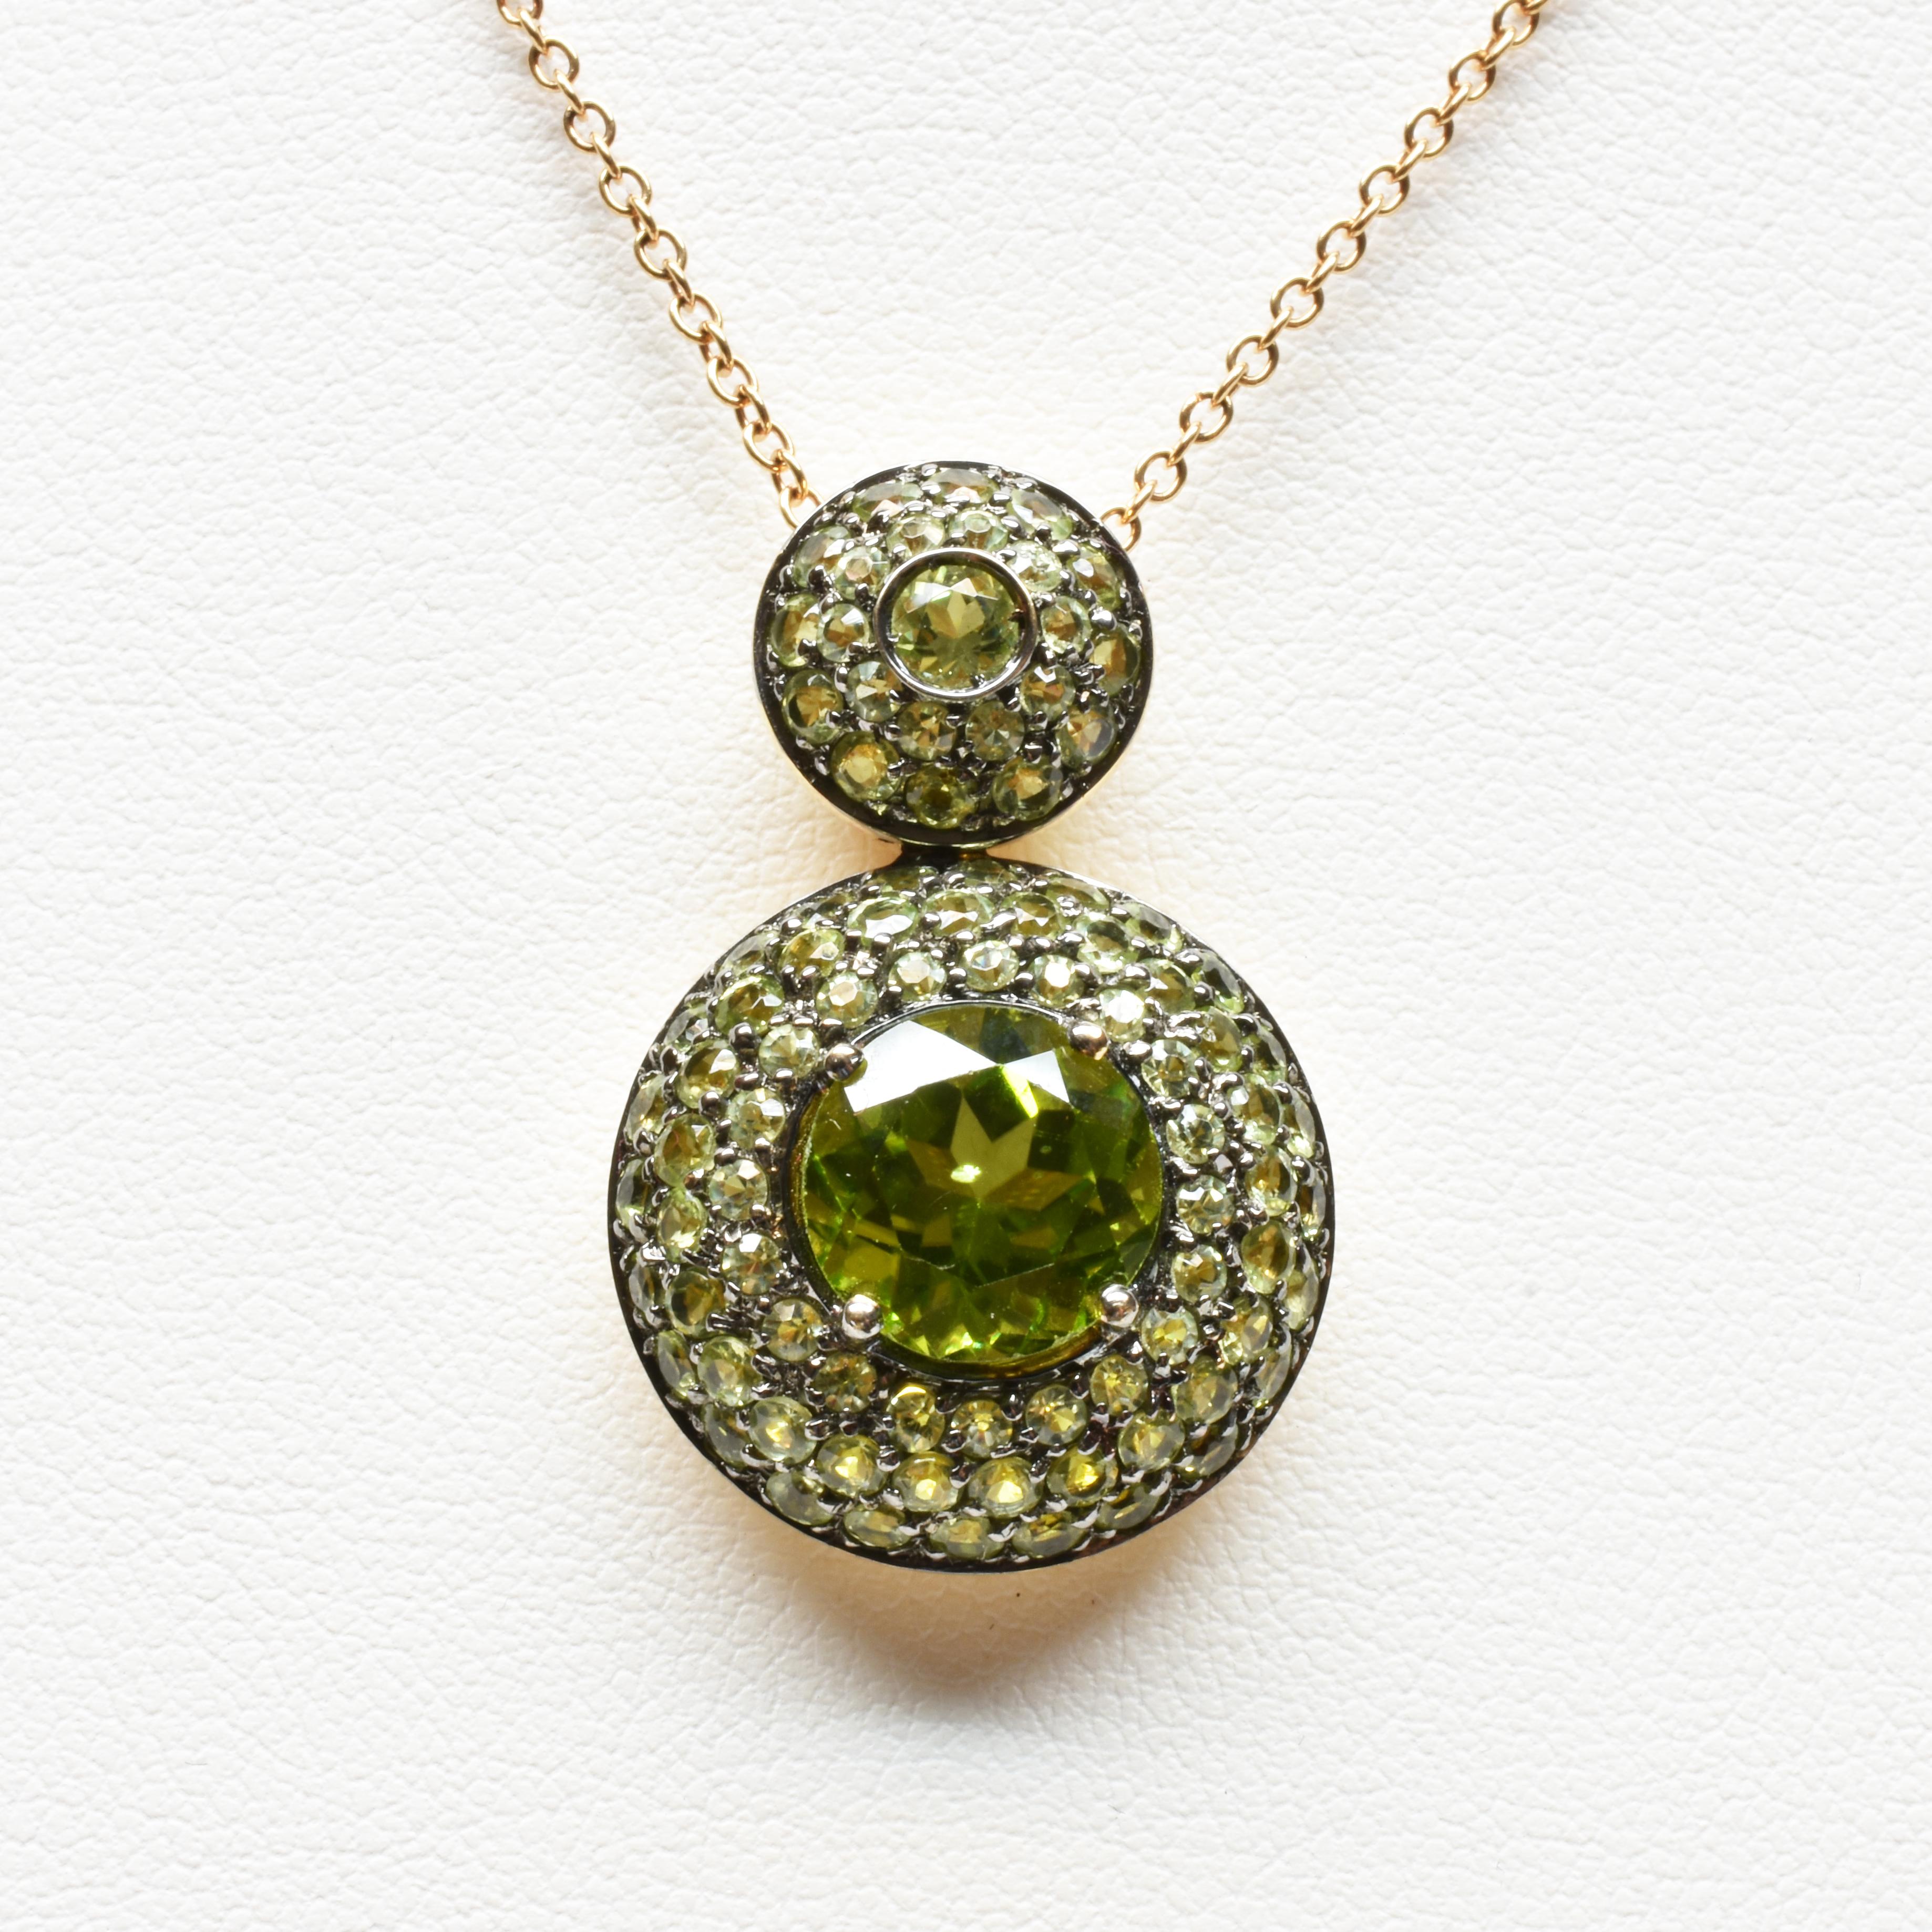 Gilberto Cassola 18Kt Rose Gold Round Pendant with Round Peridot.
Handmade in our Atelier in Valenza Italy.
The Central Peridot has a 10 mm Diameter.
Black Rhodium plated 18Kt Gold under the Peridot Paveé.
This Piece comes with a 42 cm 18Kt Rose